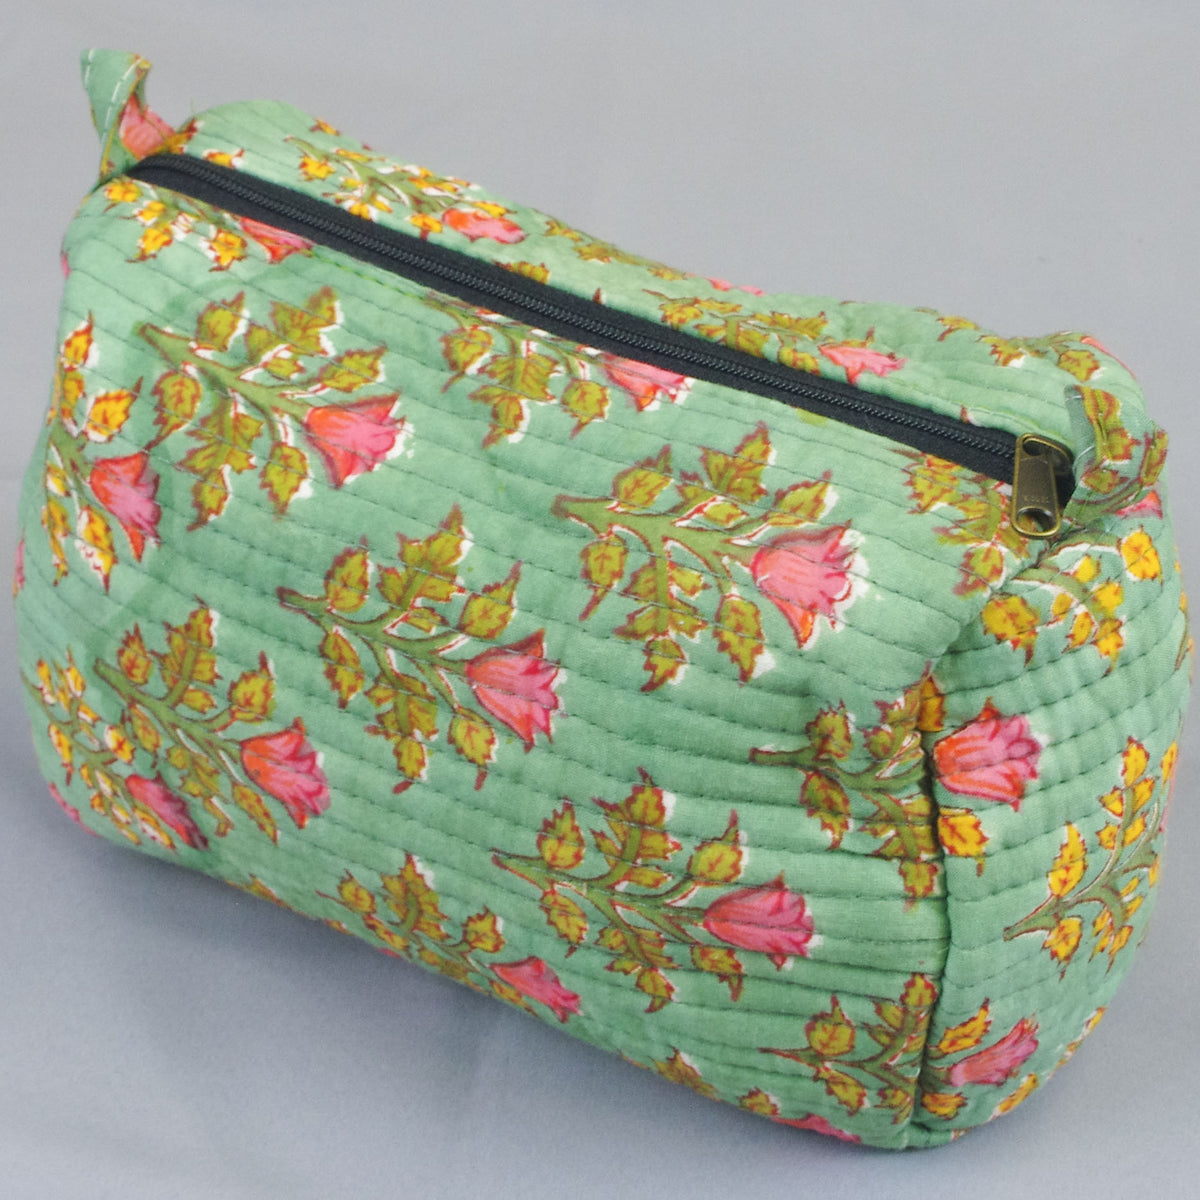 Block Print Quilted Toiletry Bag - Pink Floral Bouquet On Green